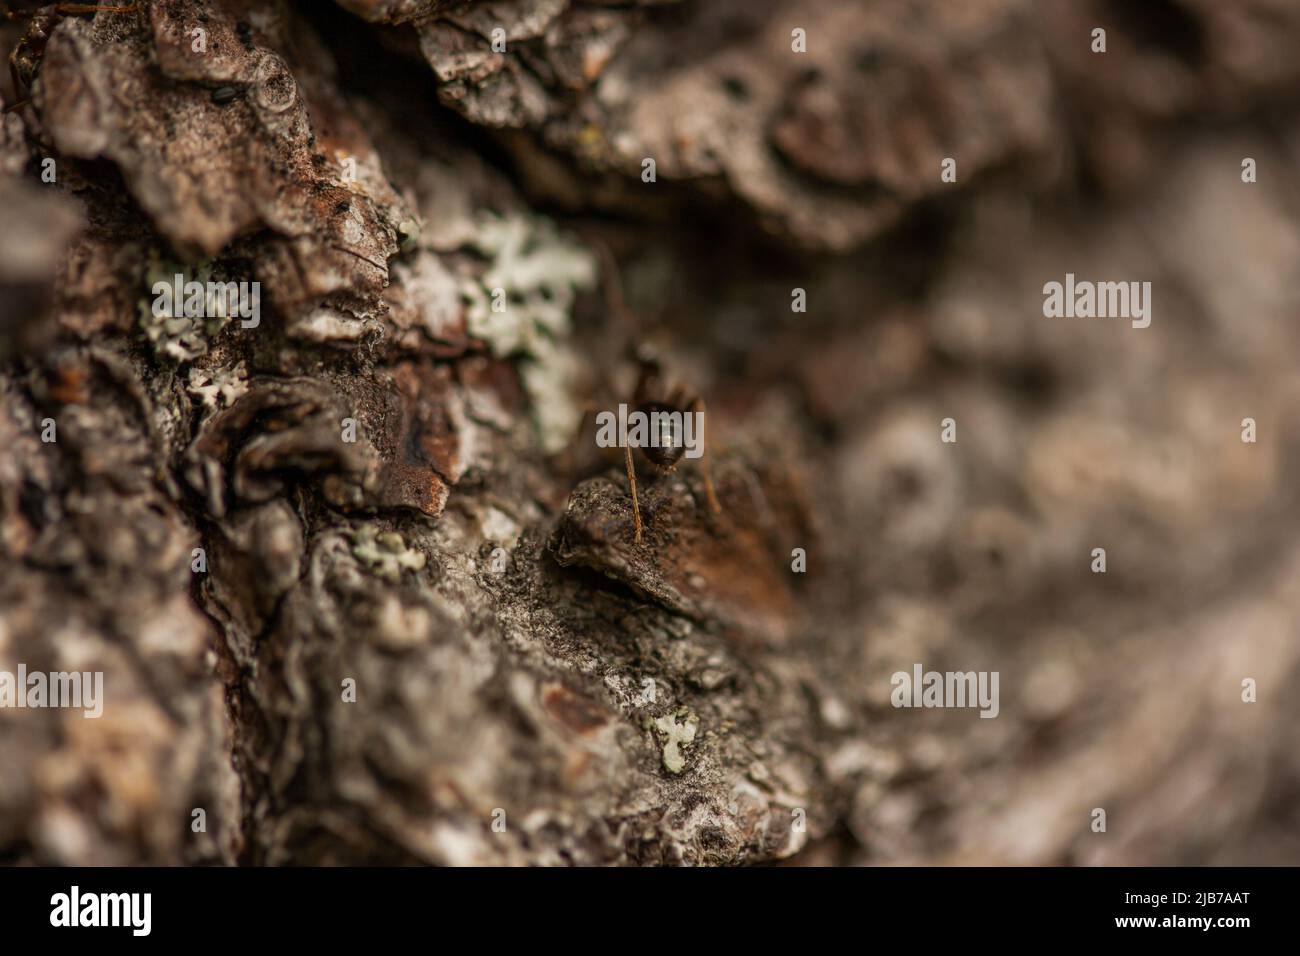 A close-up of an ant's back that crawls under the bark of a pine tree. Stock Photo